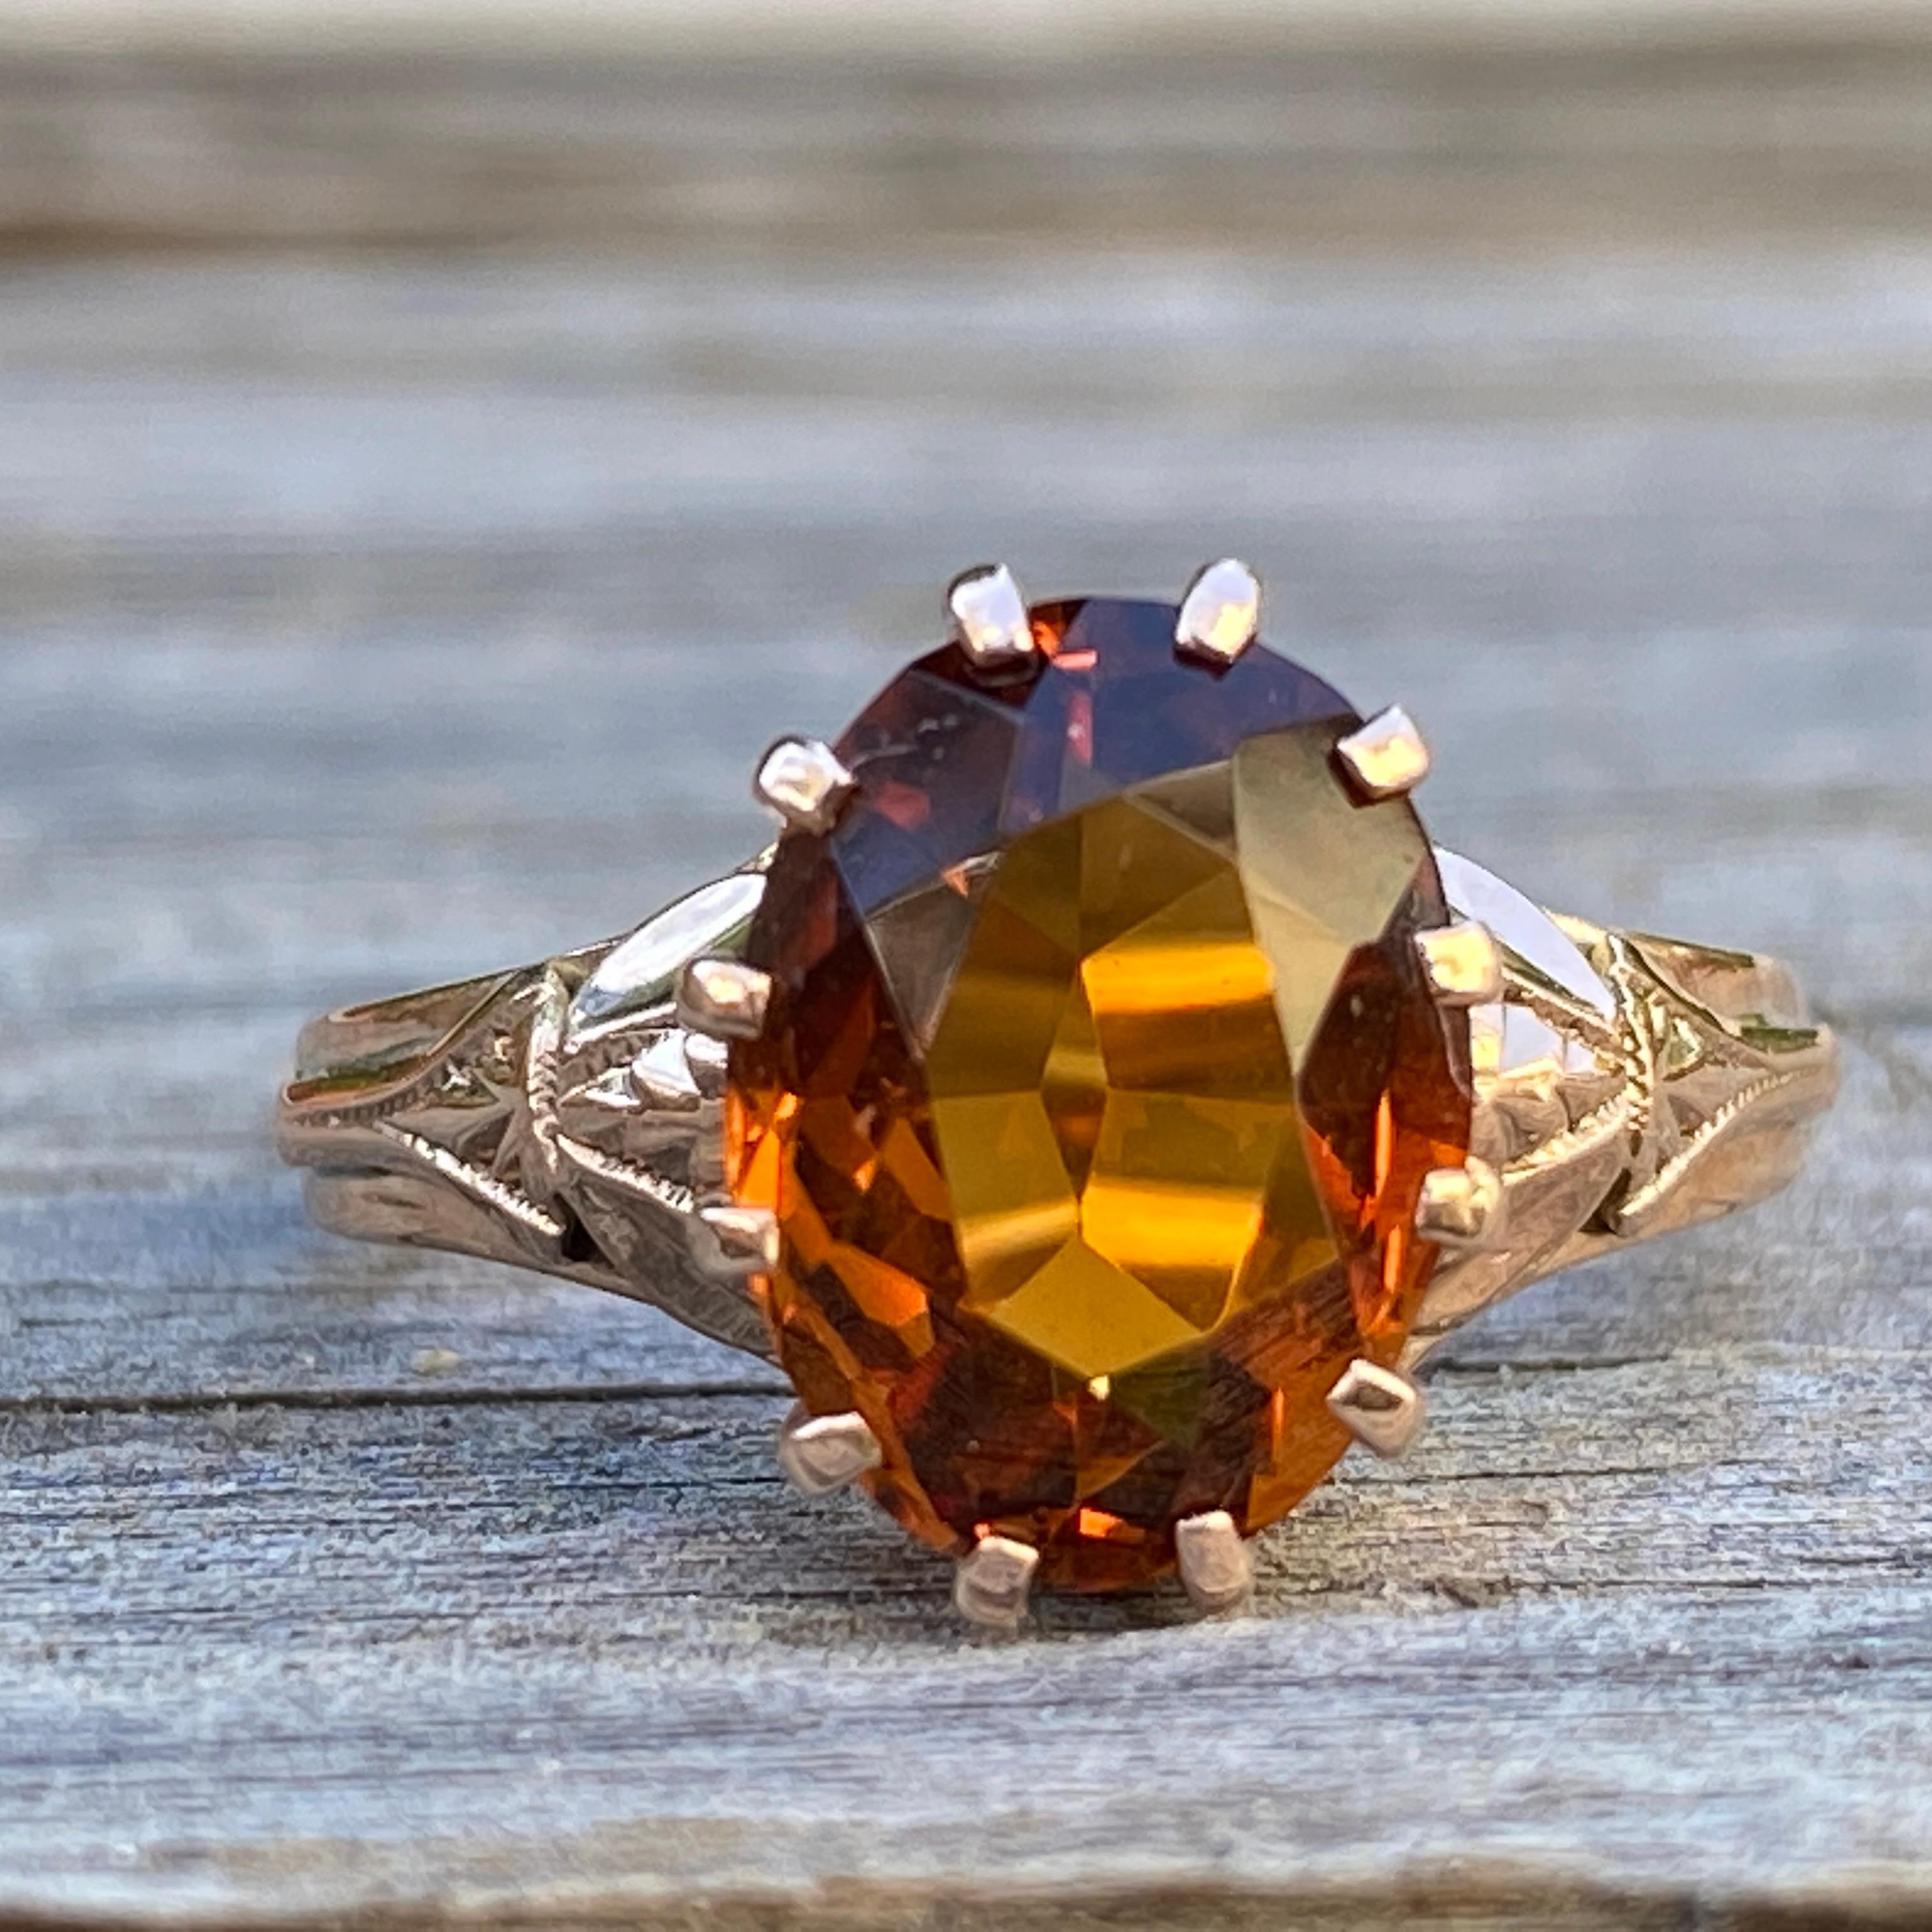 Details:
Stunning Madeira Citrine set in 10K rose gold. The citrine is a gorgeous rich orange color. The Victorian setting has a sweet leaf pattern on the shoulders and a lovely claw setting. Please ask all necessary questions prior to placing an